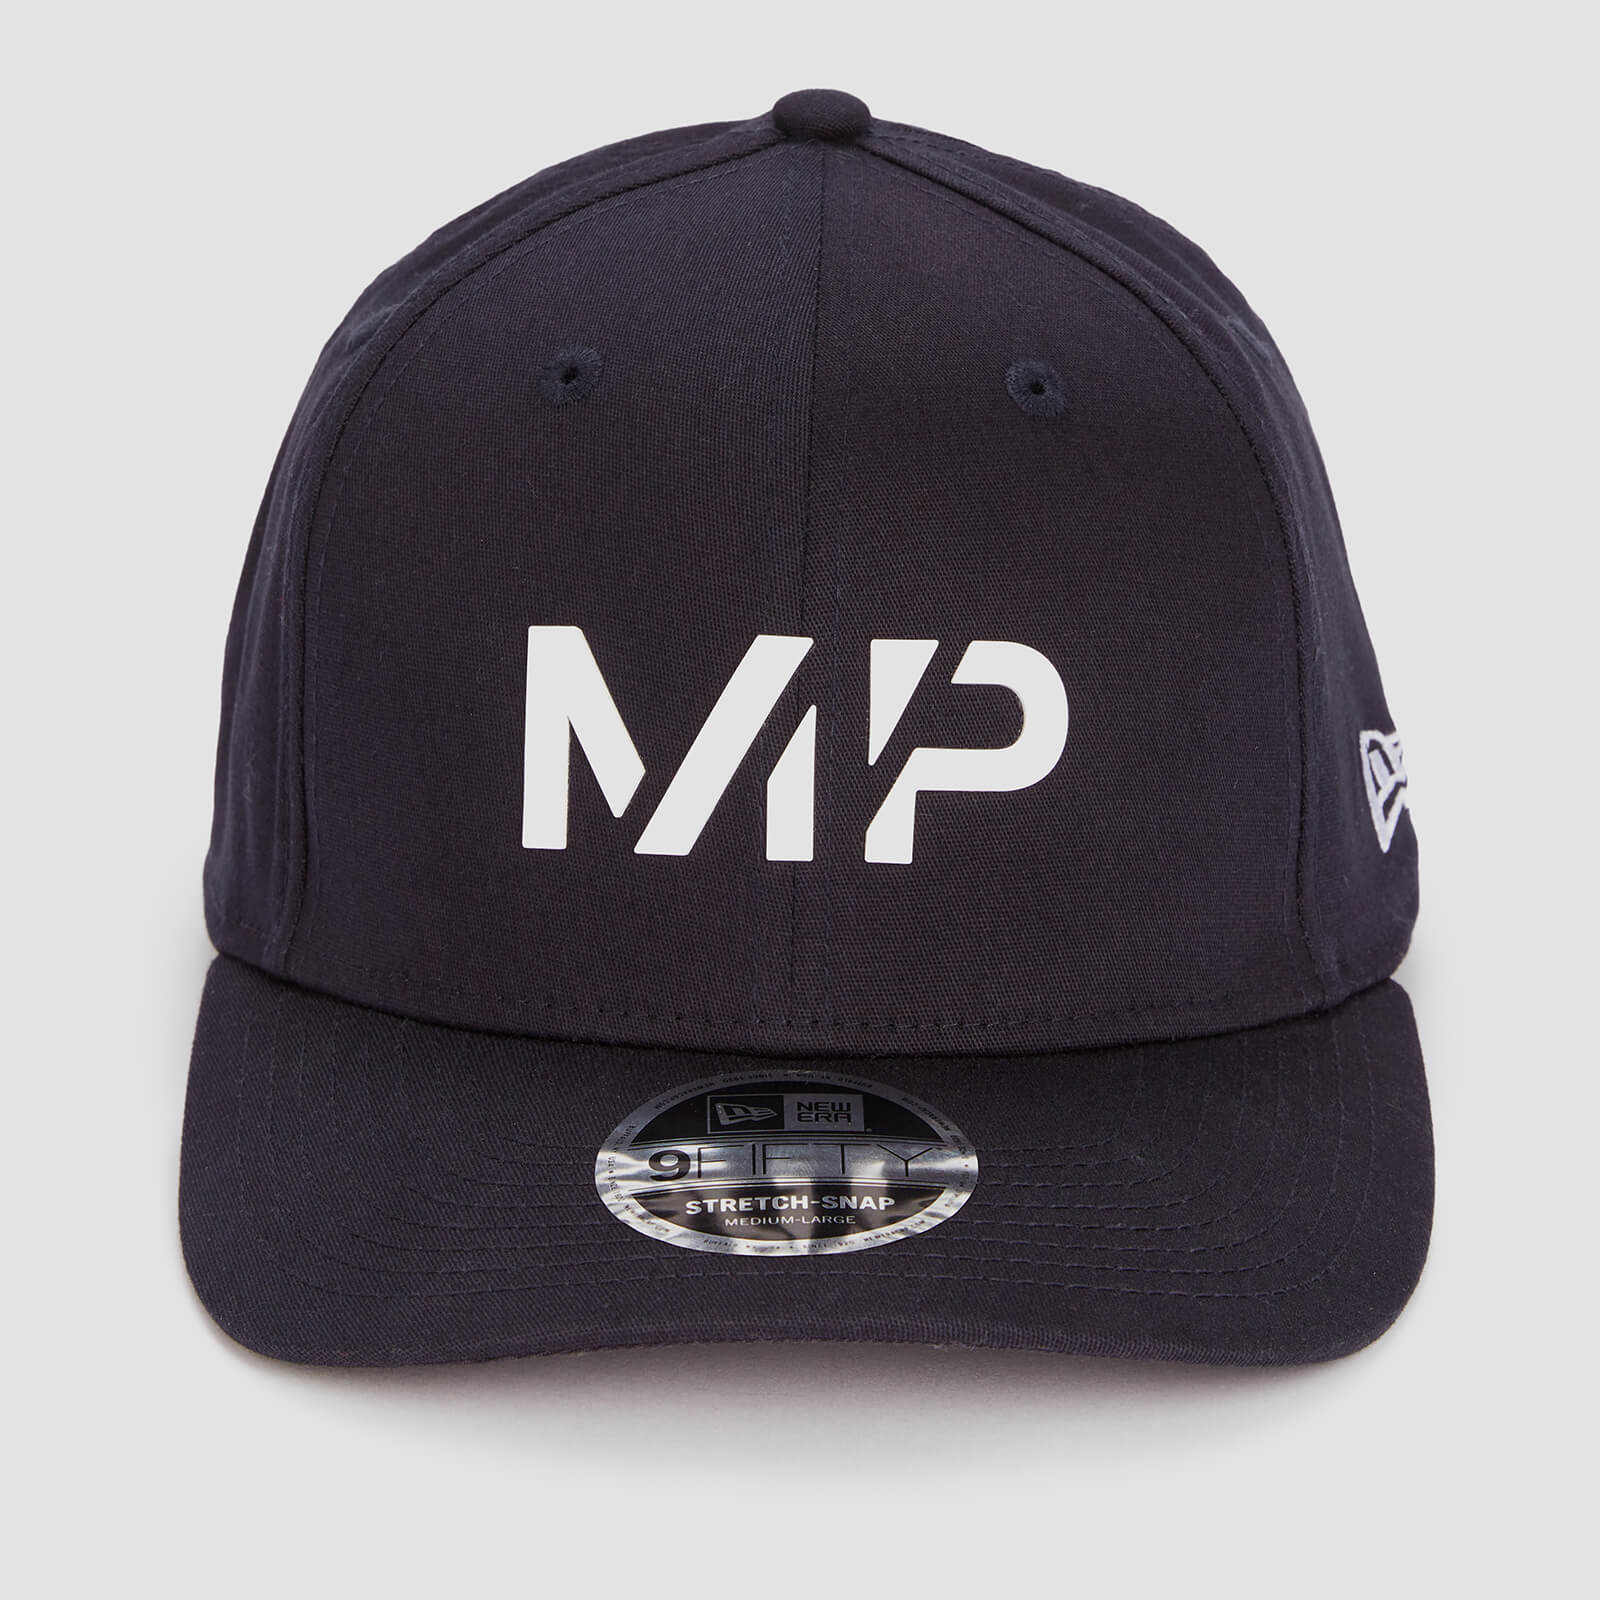 Clothing Accessories  Myprotein MP New Era 9FIFTY Stretch Snapback - Navy/White - M-L